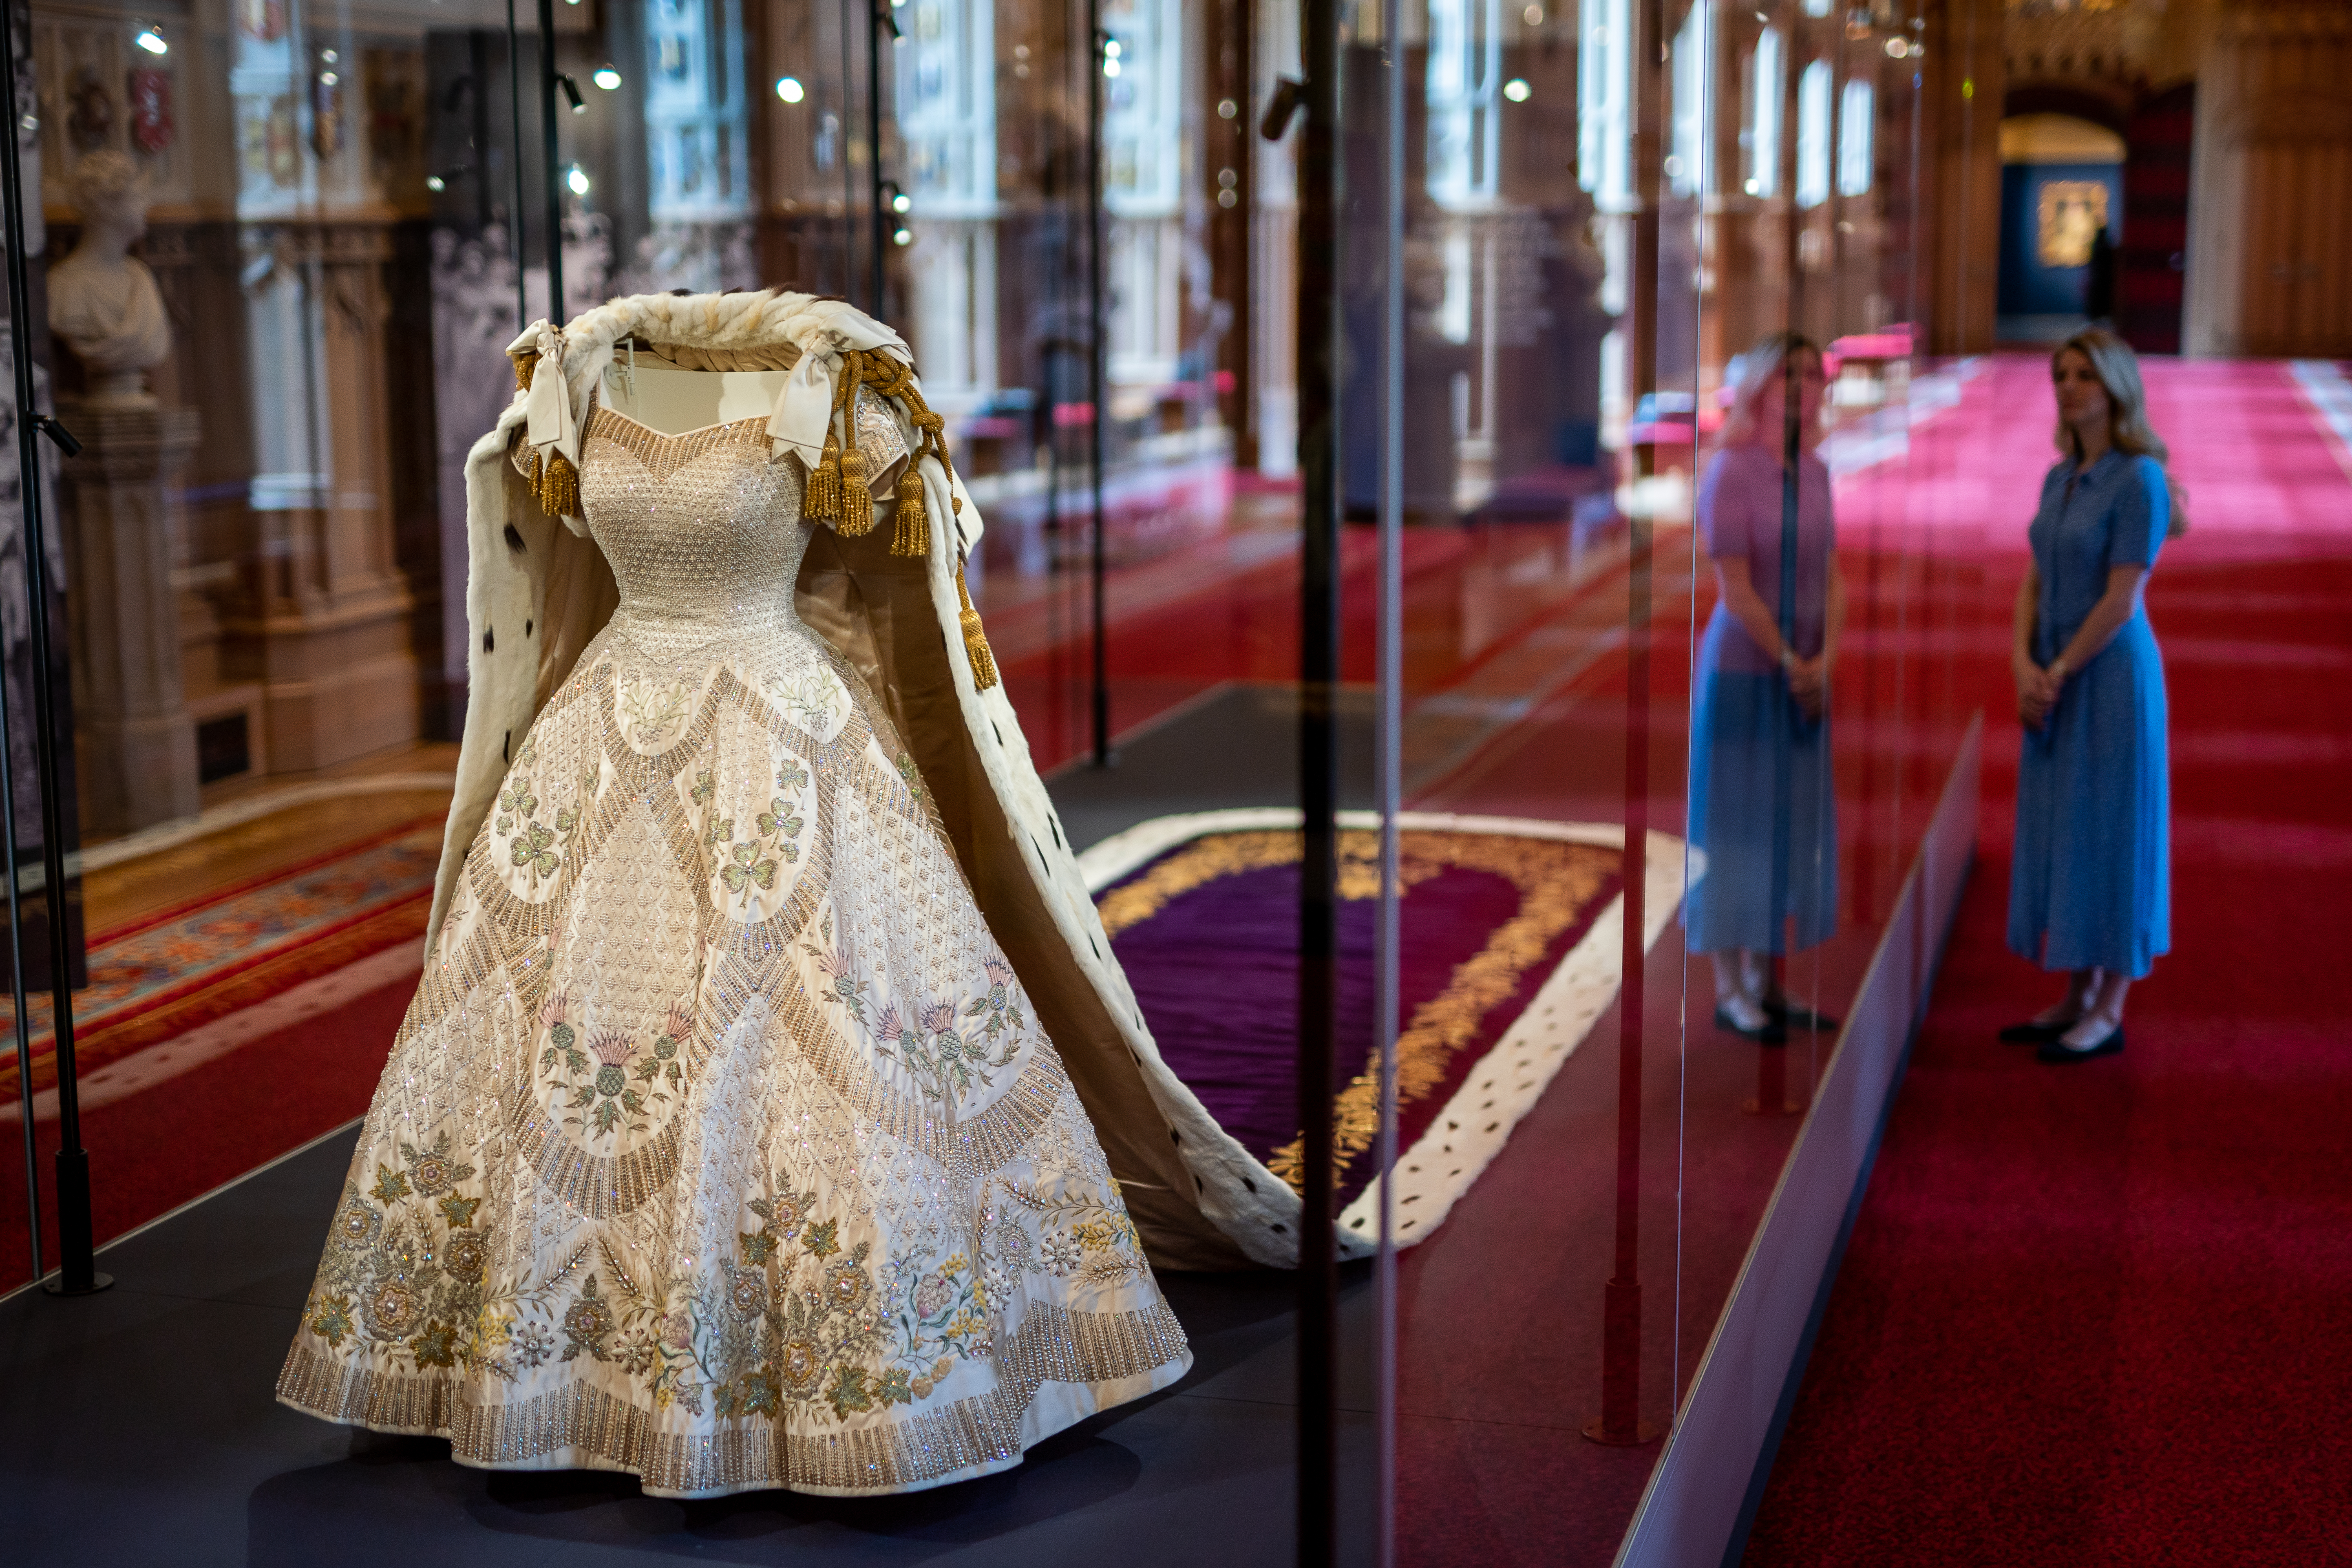 The Queen's coronation dress on display